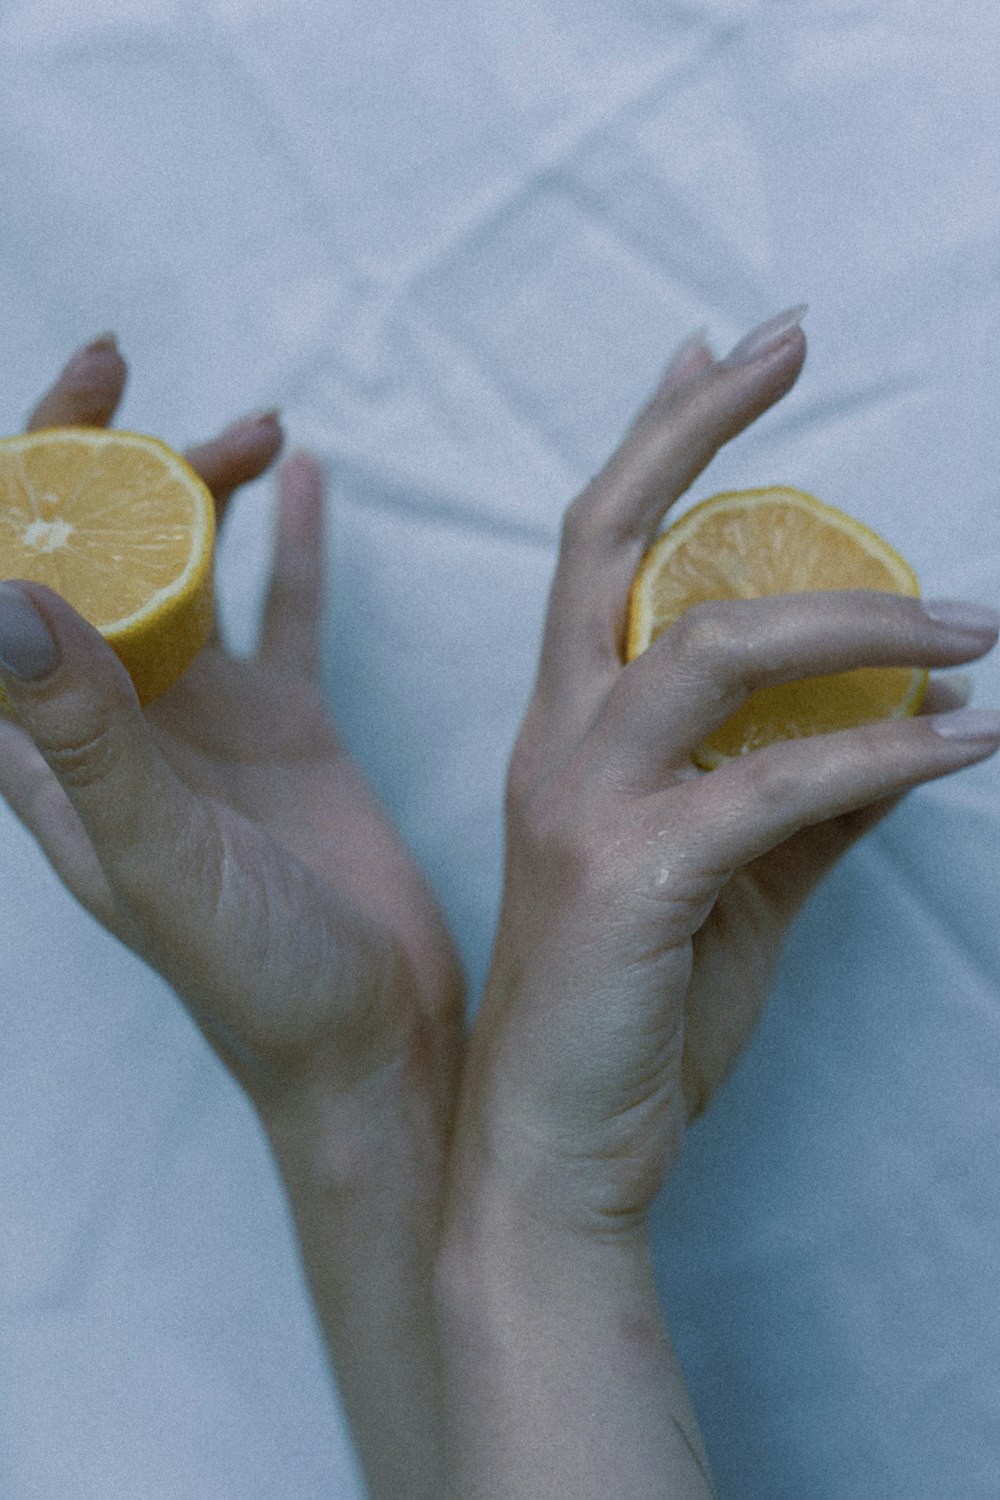 a woman's hands holding a half of an orange